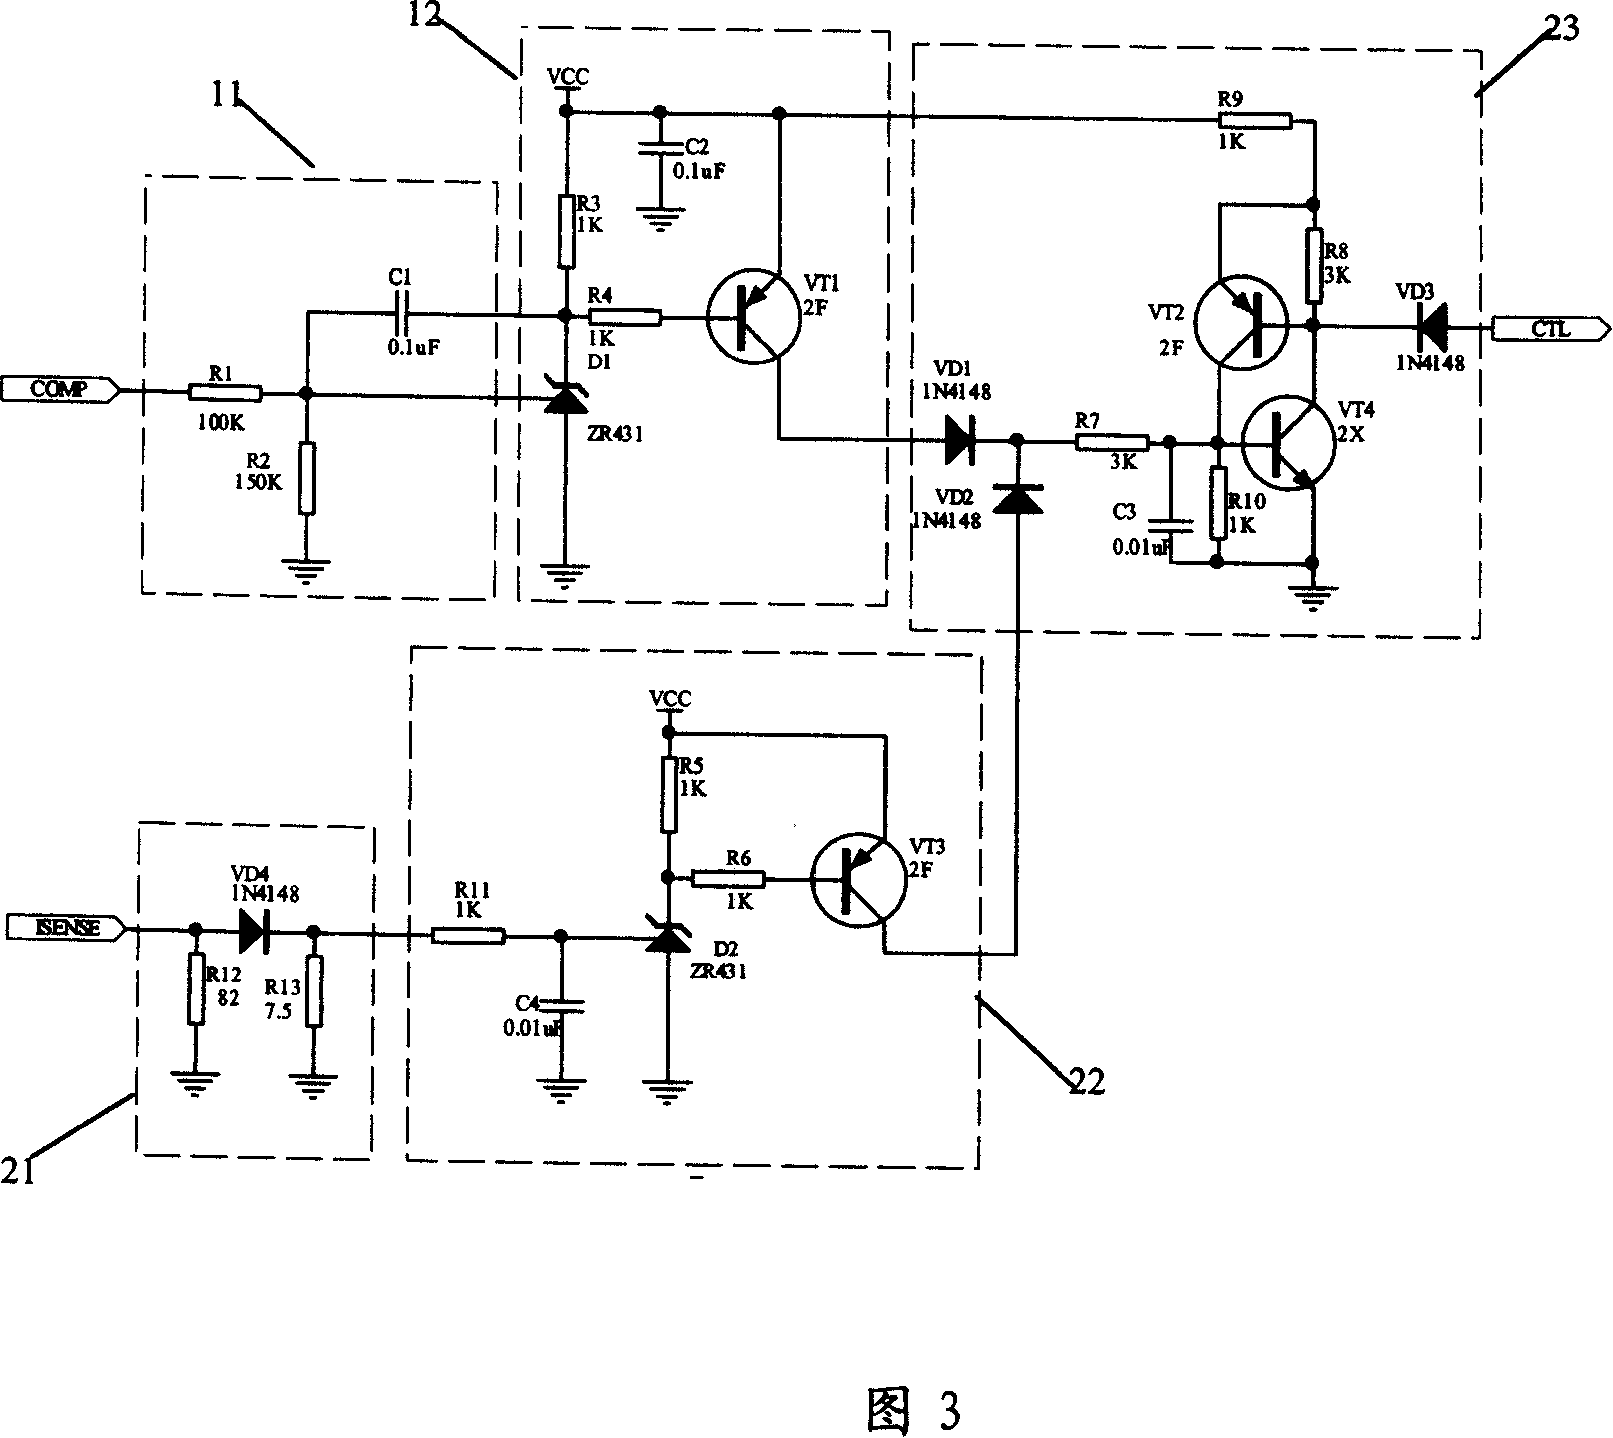 A control circuit of power supply with capacitance load capability